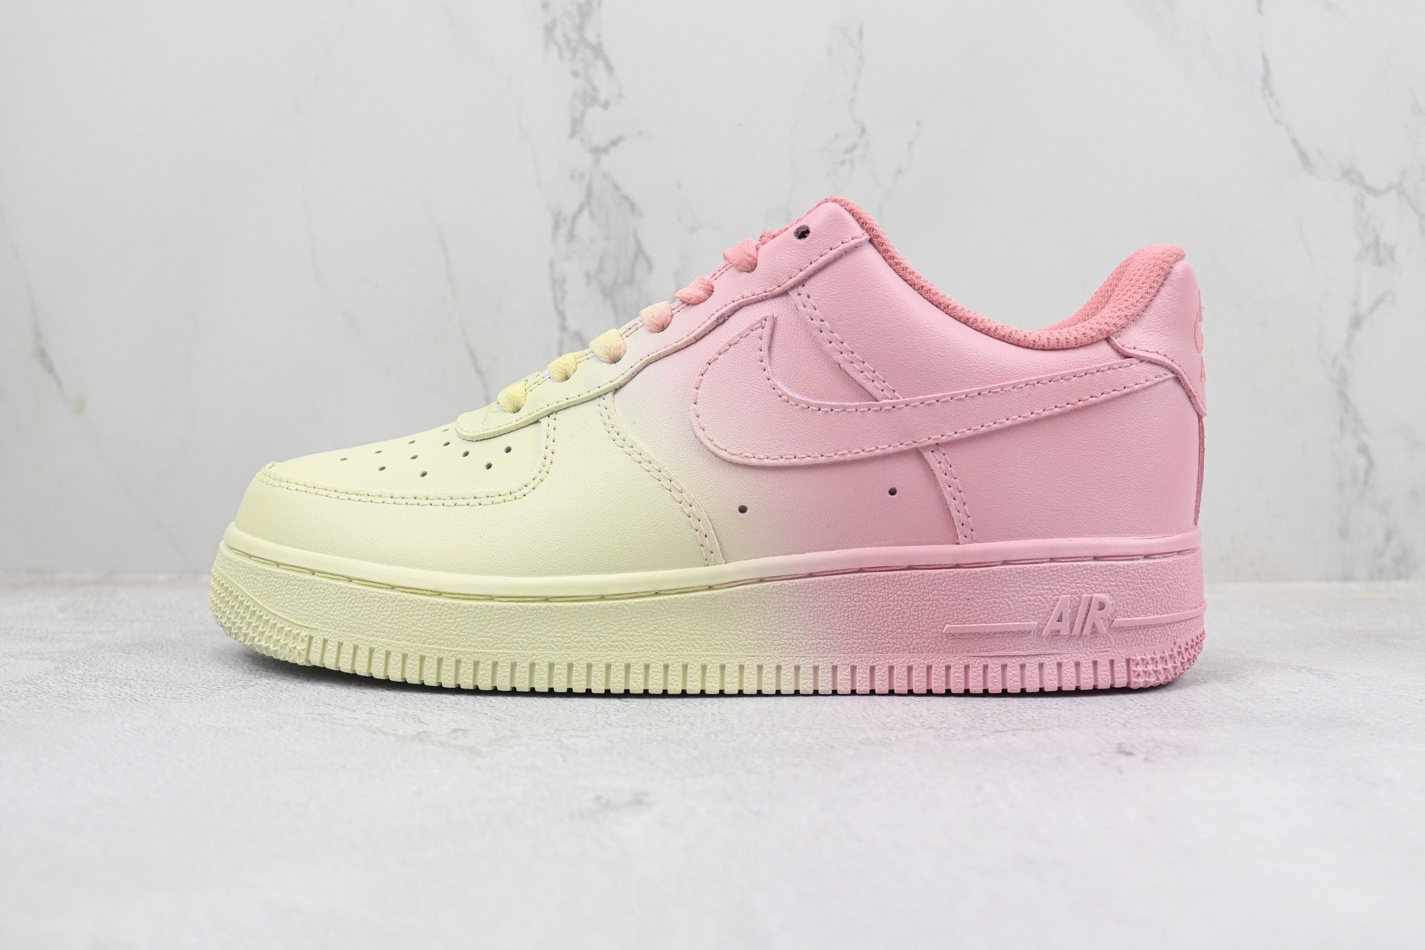 Nike Air Force 1 07 Low White Rose Pink Yellow QR2023-520: Stylish and Versatile Sneakers